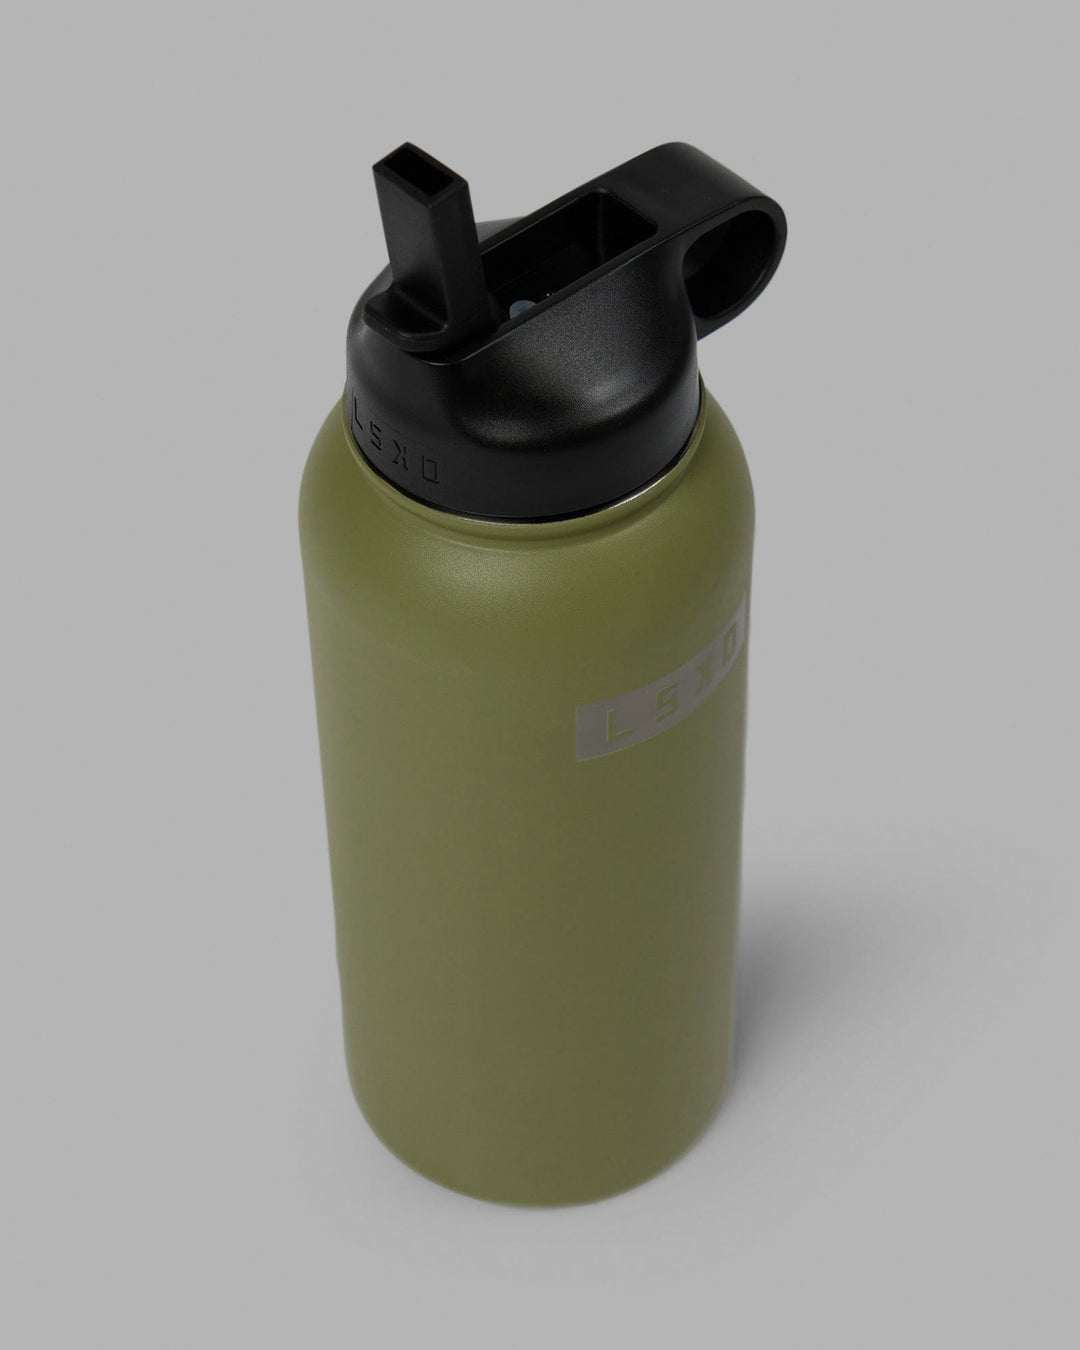 Hydrosphere 32oz Insulated Metal Bottle - Moss Stone